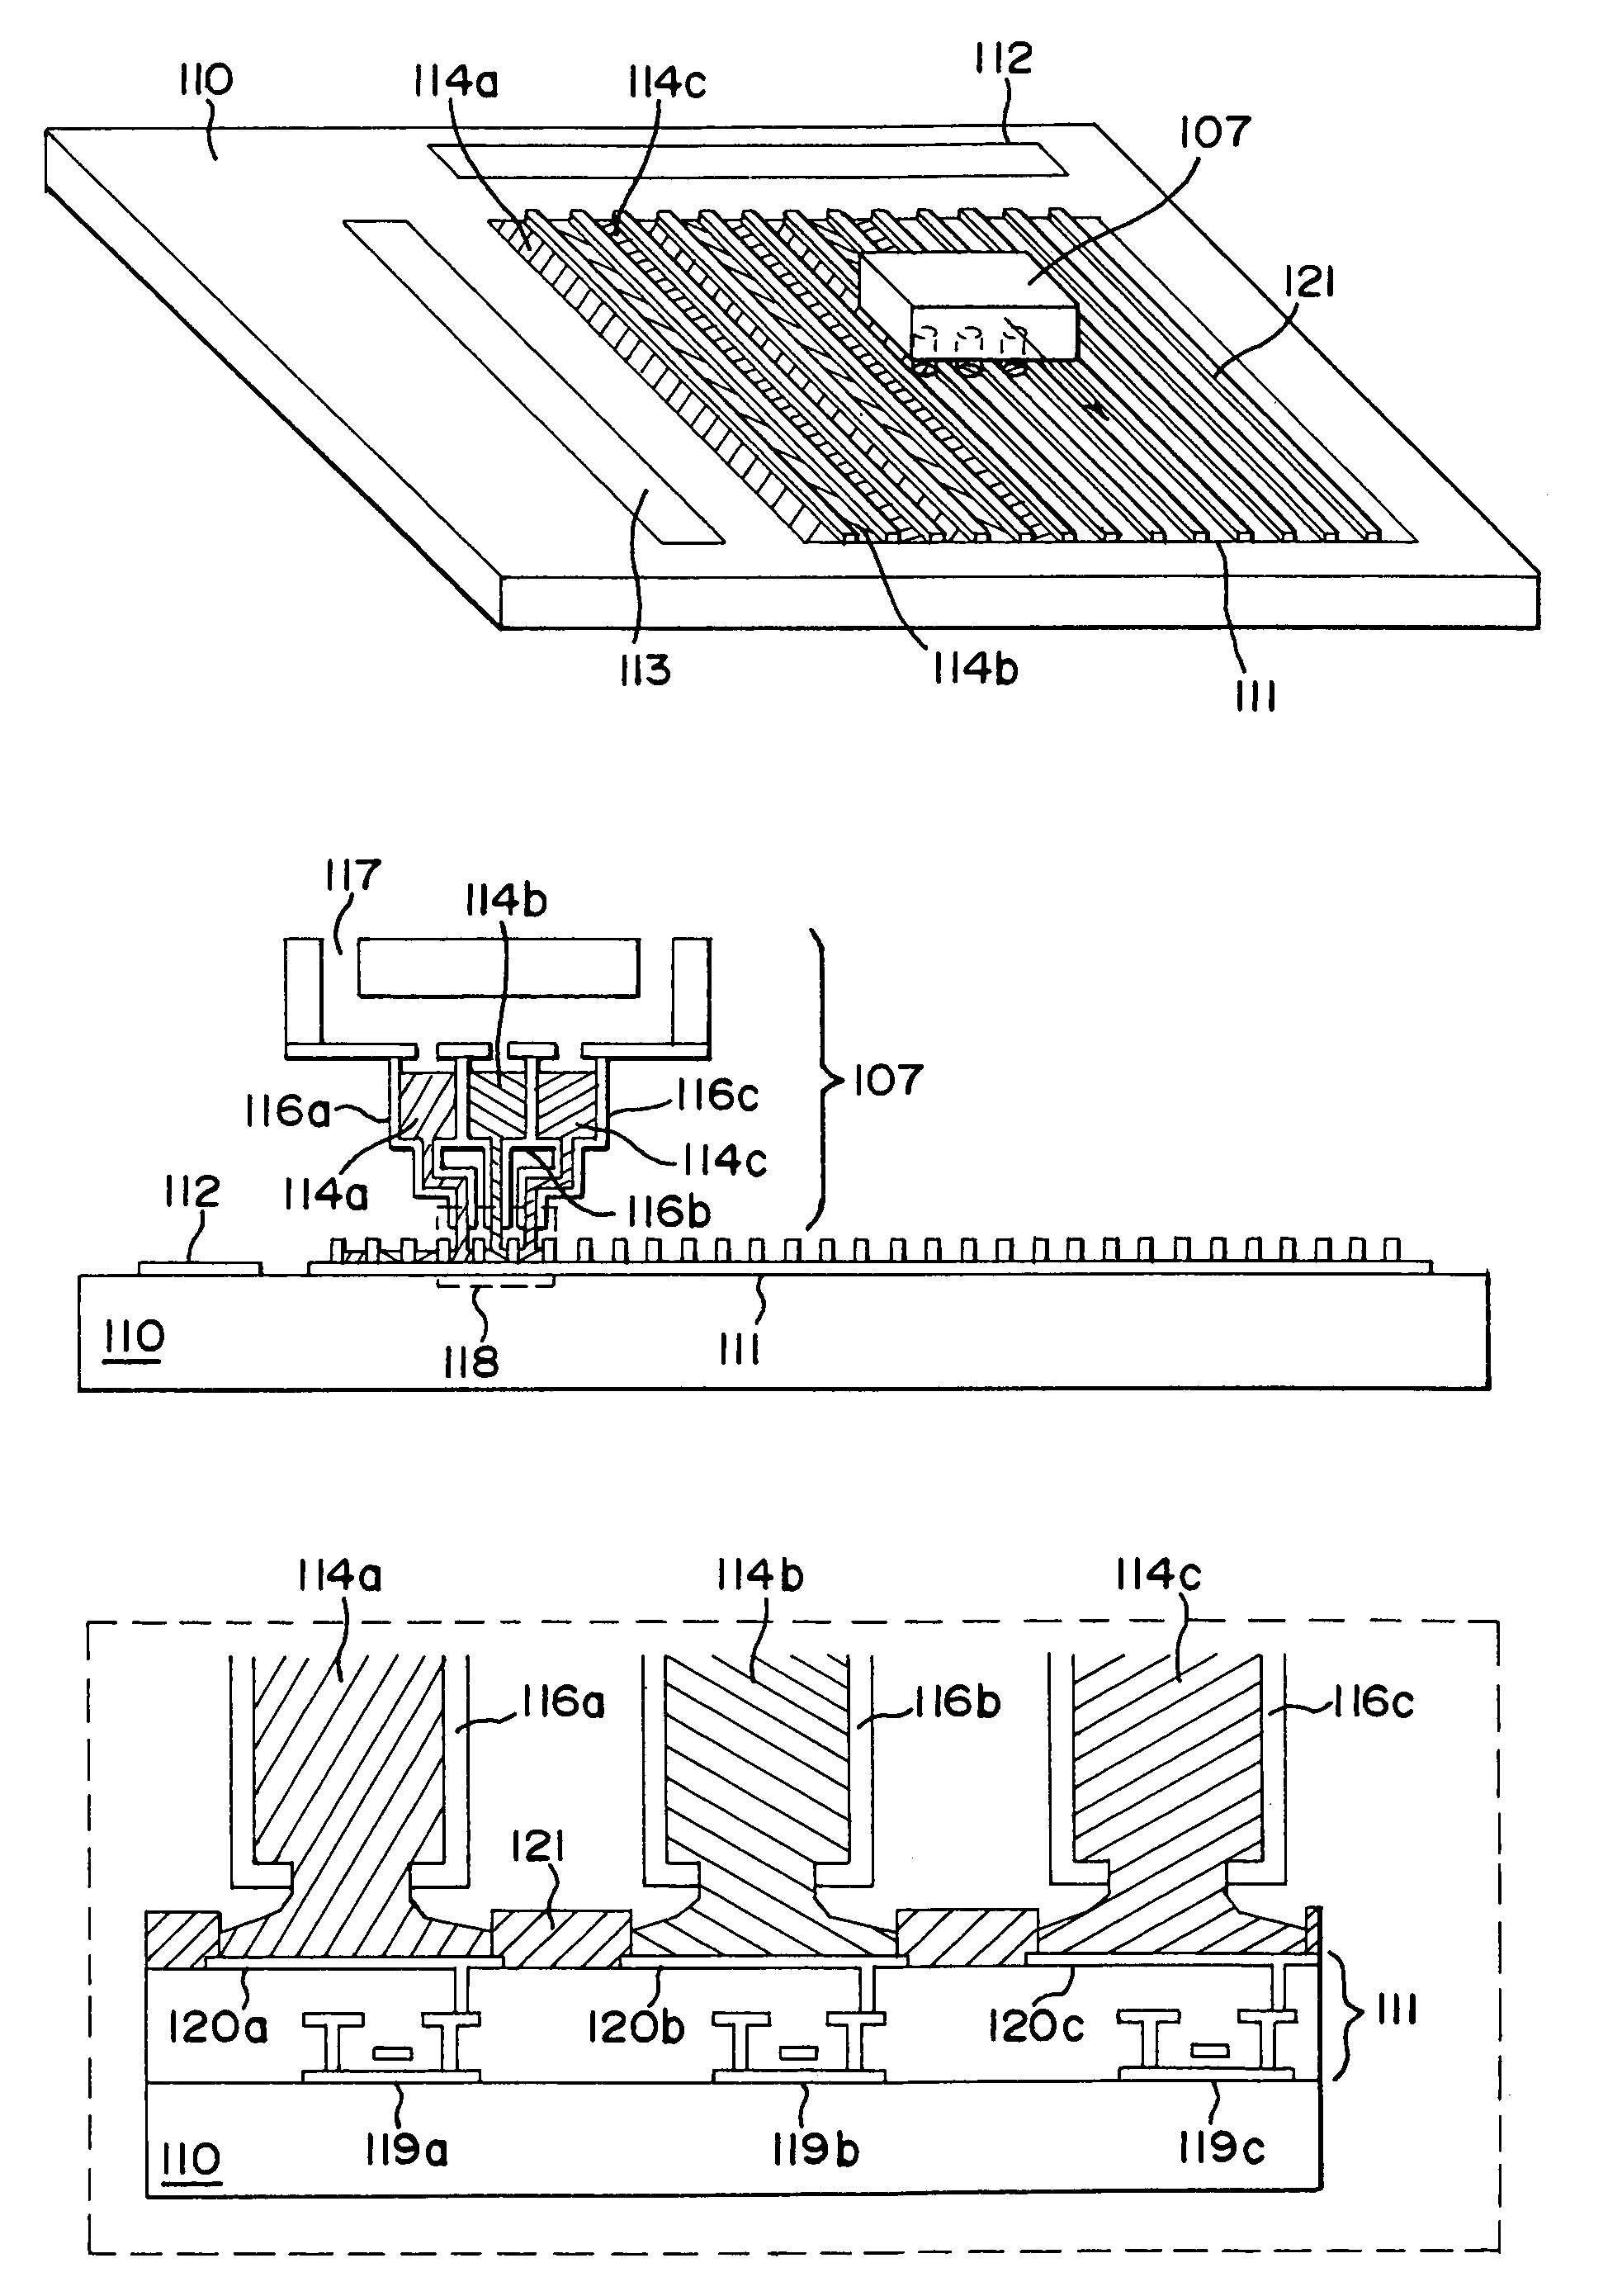 Method for precisely forming light emitting layers in a semiconductor device